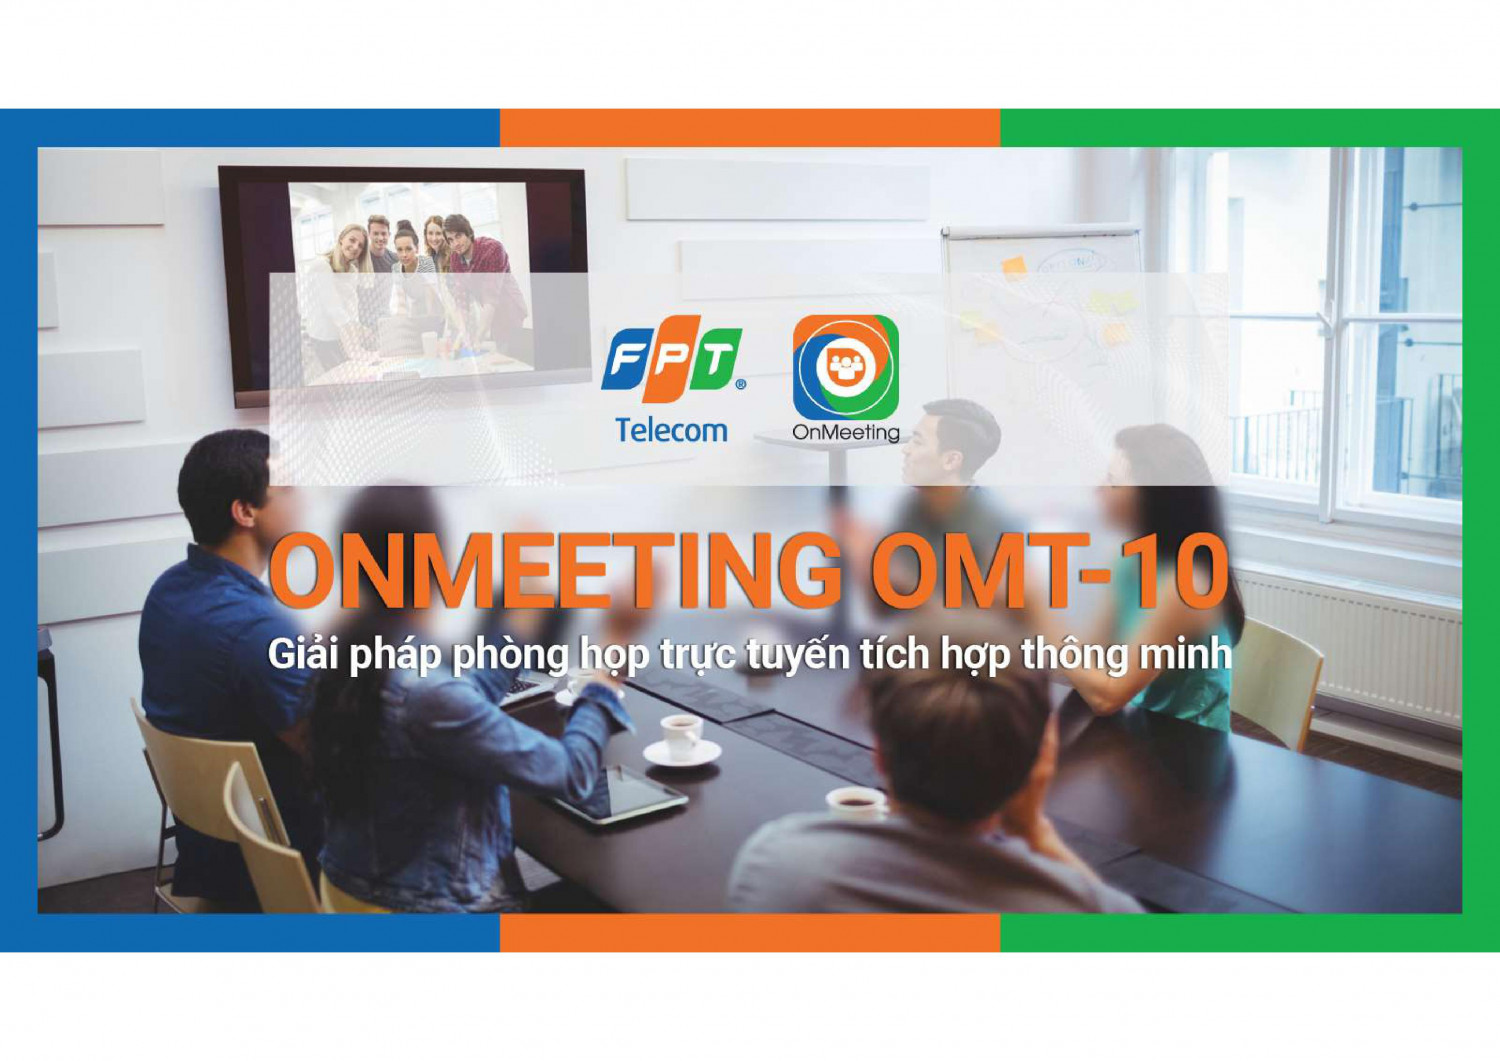 FPT - Onmeeting